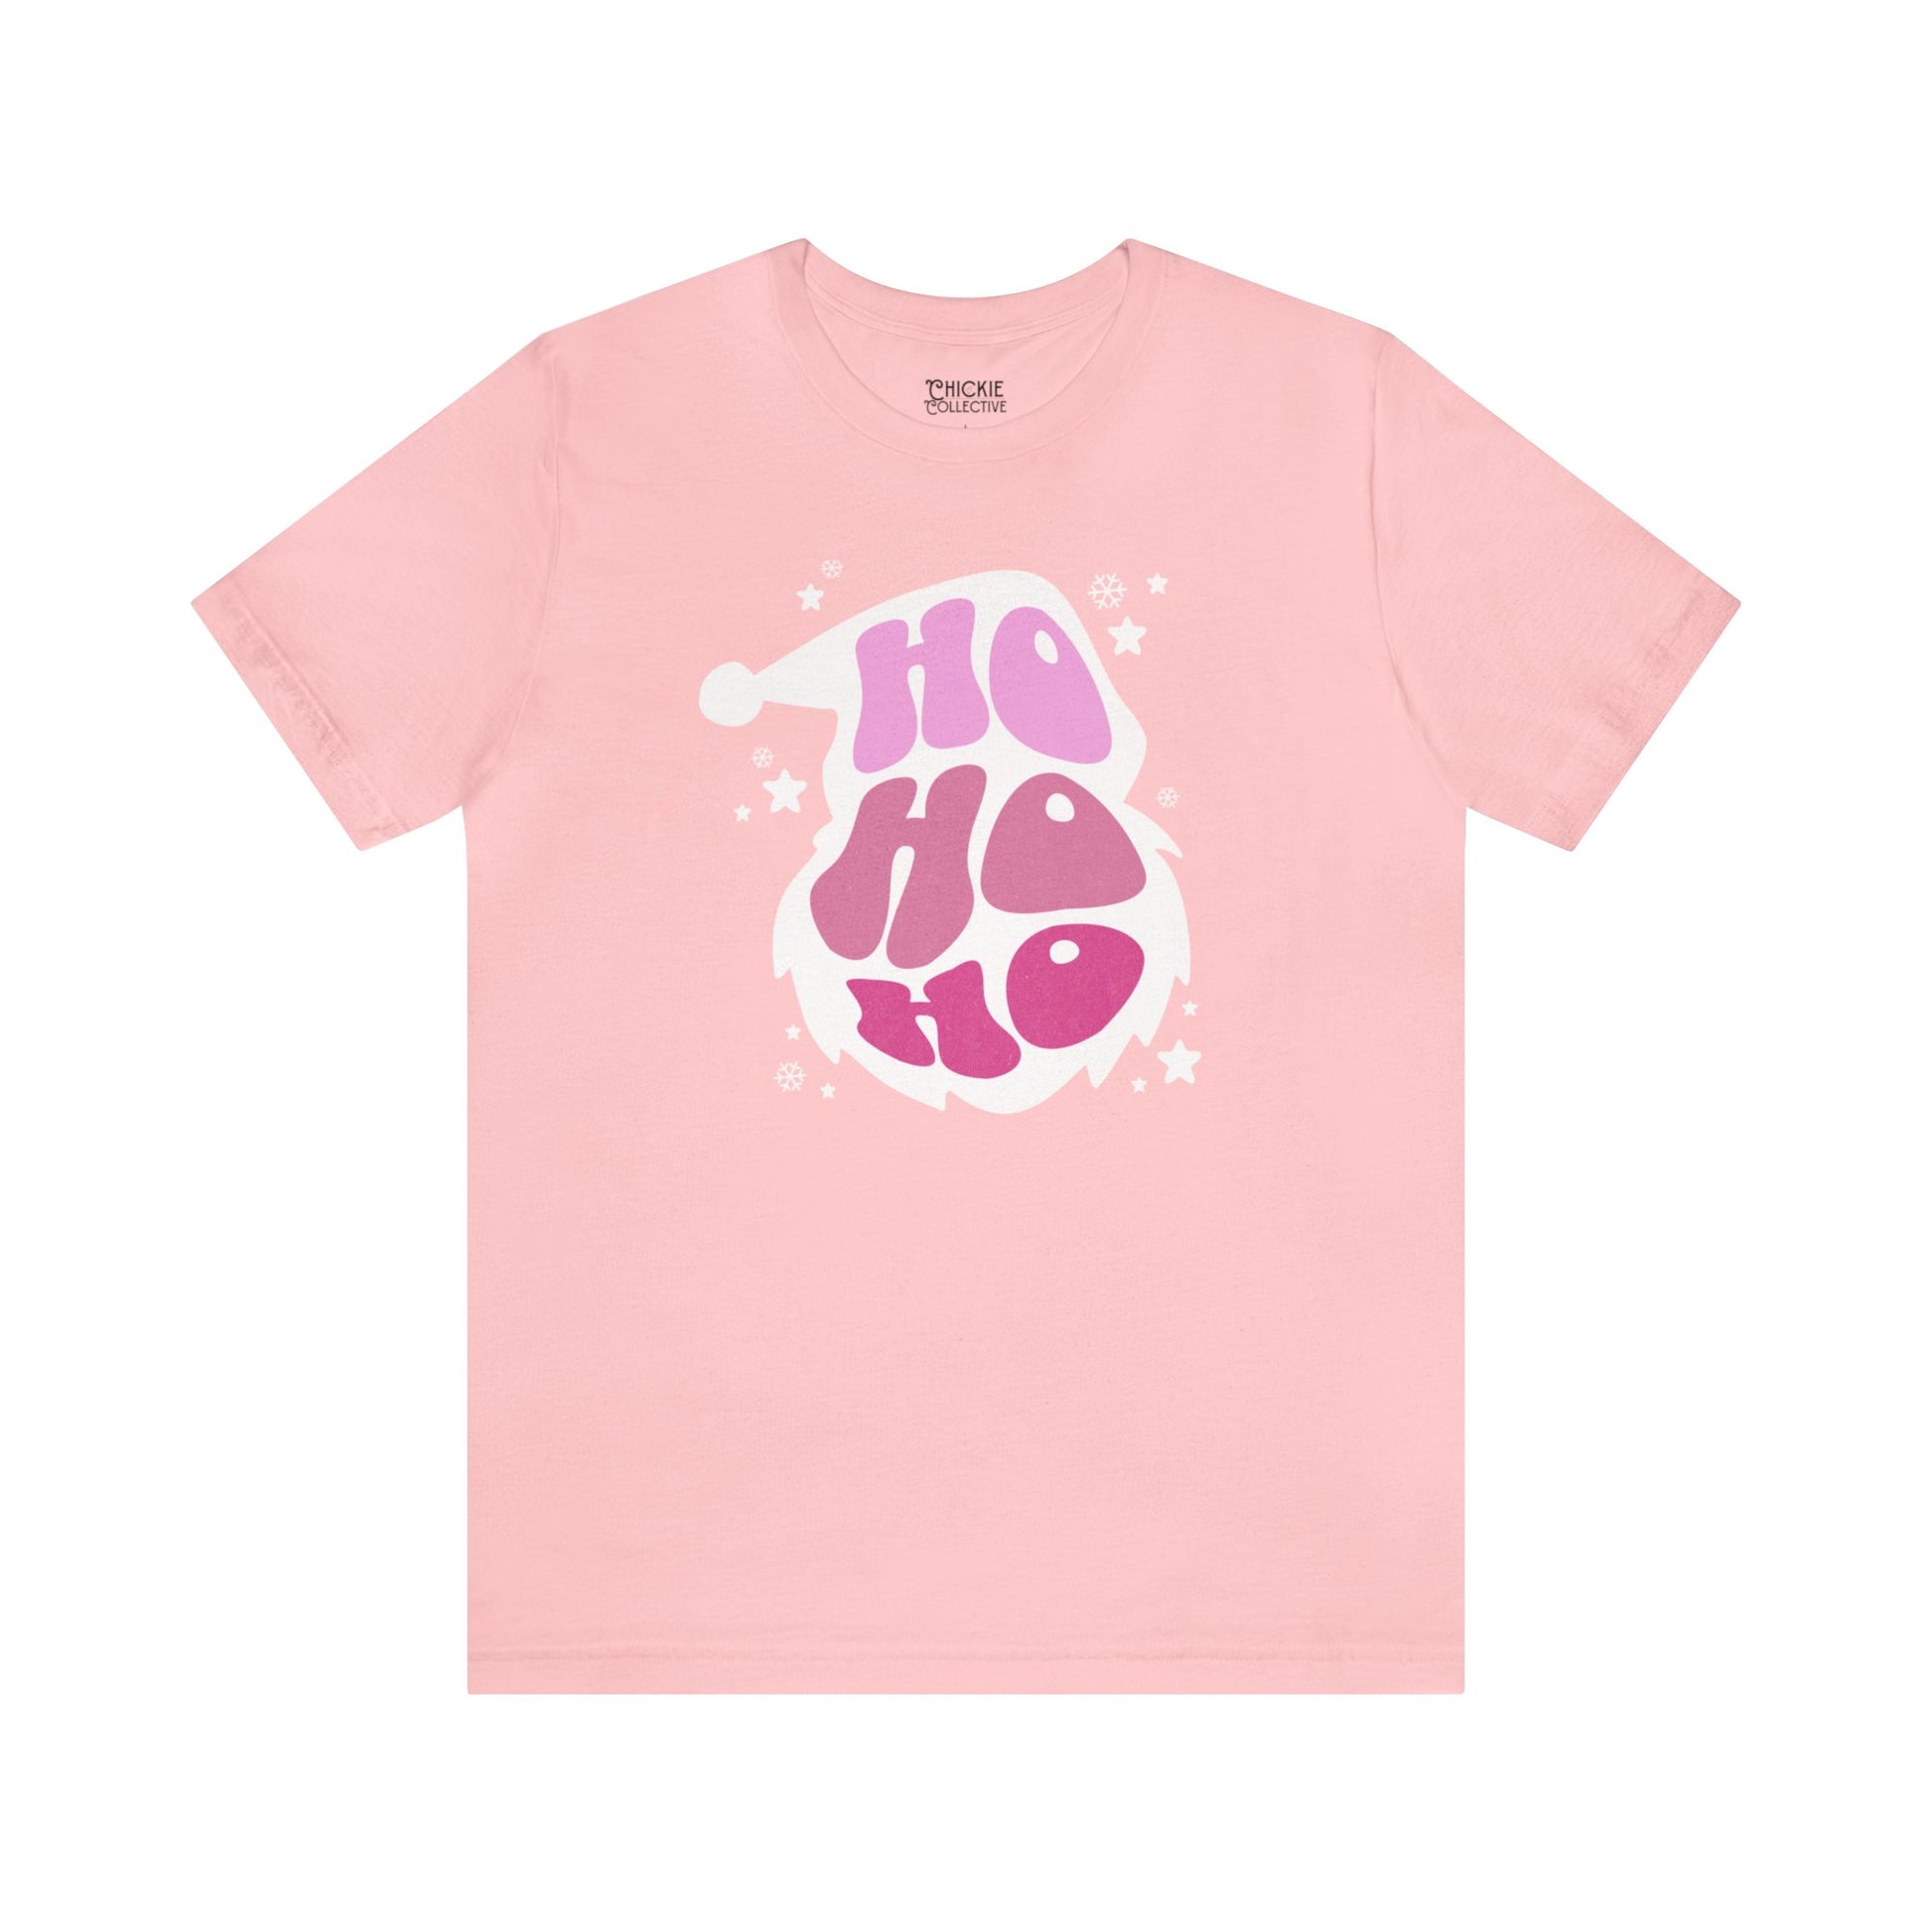 Unisex Jersey Short Sleeve Tee T-Shirt Pink S  - Chickie Collective